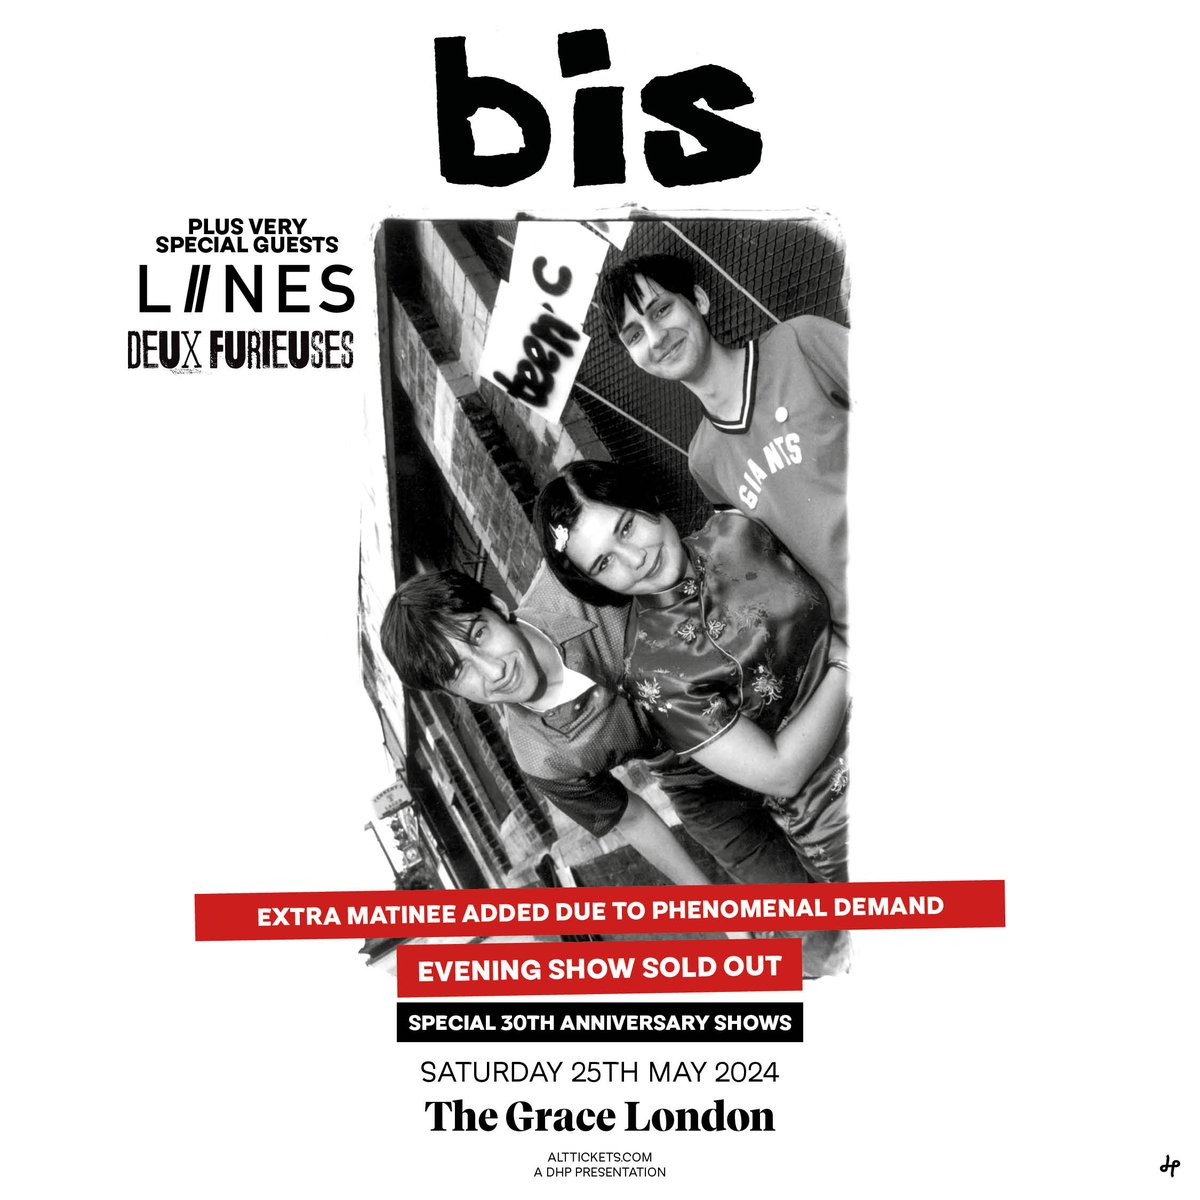 YEAH, LONDON! We are thrilled that we get to celebrate @thebandbis' 30th anniversary TWICE on 25 May. Now with added MATINEE show – the evening is SOLD OUT – *AND* with added @DEUXFURIEUSES 🖤 For £15... come on! 👉 bit.ly/49F31fP